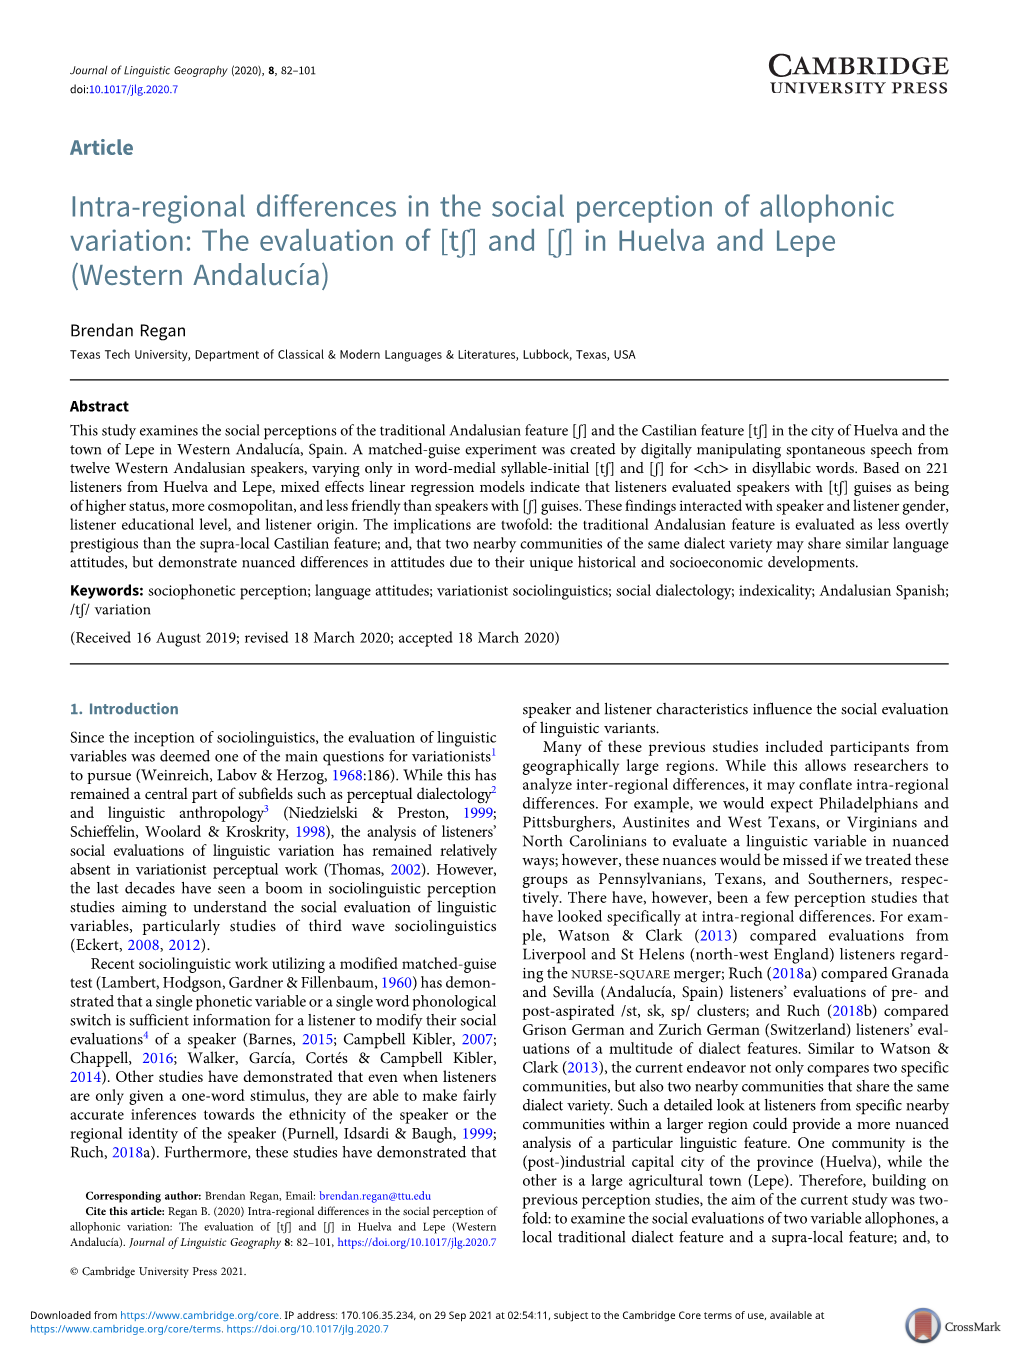 Intra-Regional Differences in the Social Perception of Allophonic Variation: the Evaluation of [Tʃ] and [Ʃ] in Huelva and Lepe (Western Andalucía)